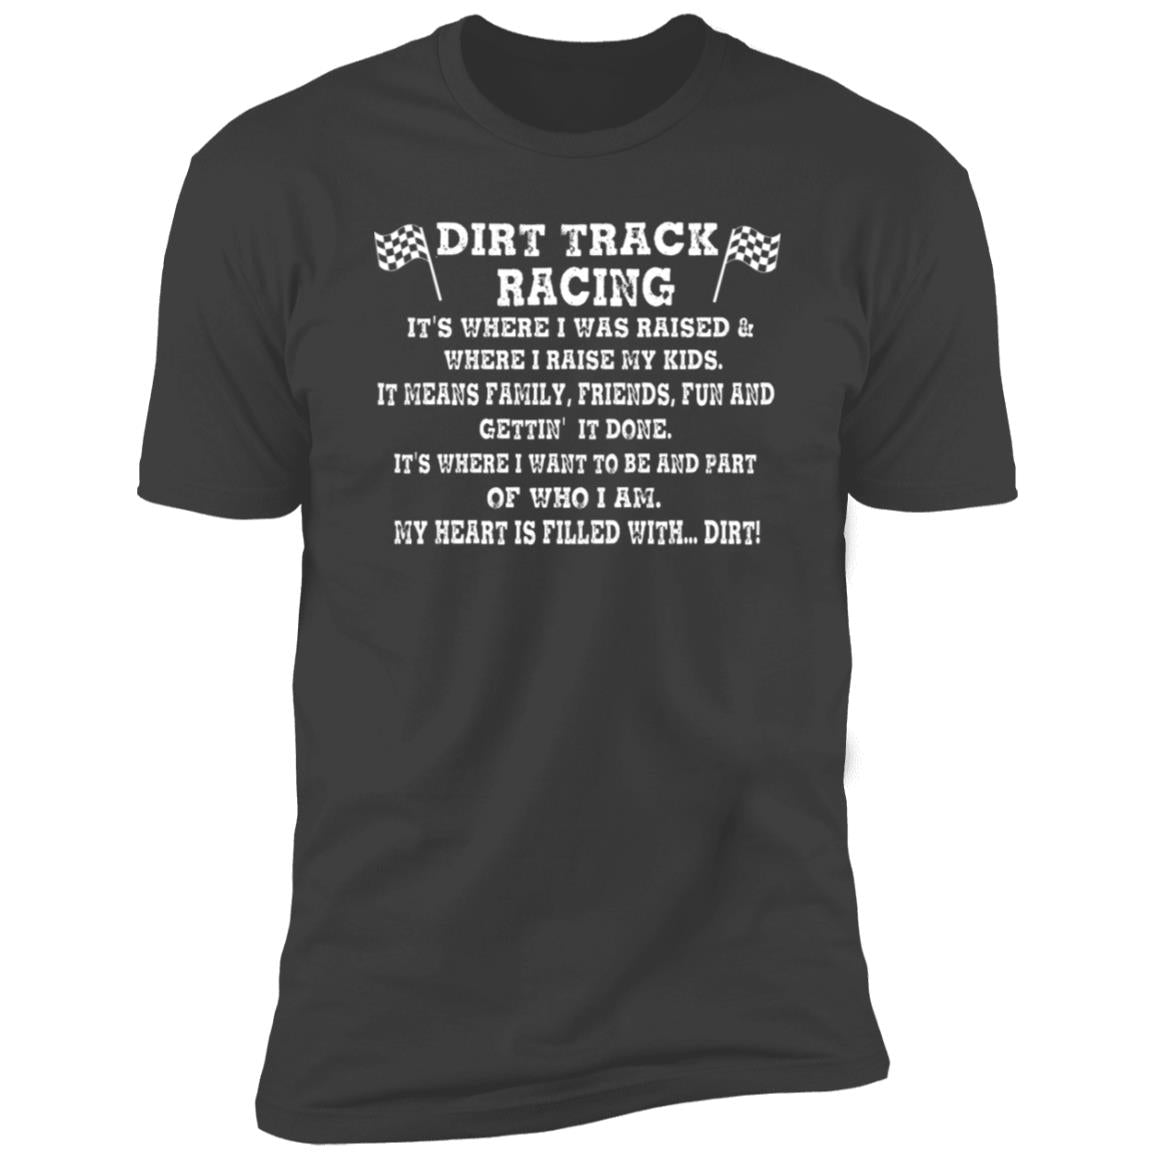 Dirt Track Racing It's Where I Was Raised Premium Short Sleeve Tee (Closeout)